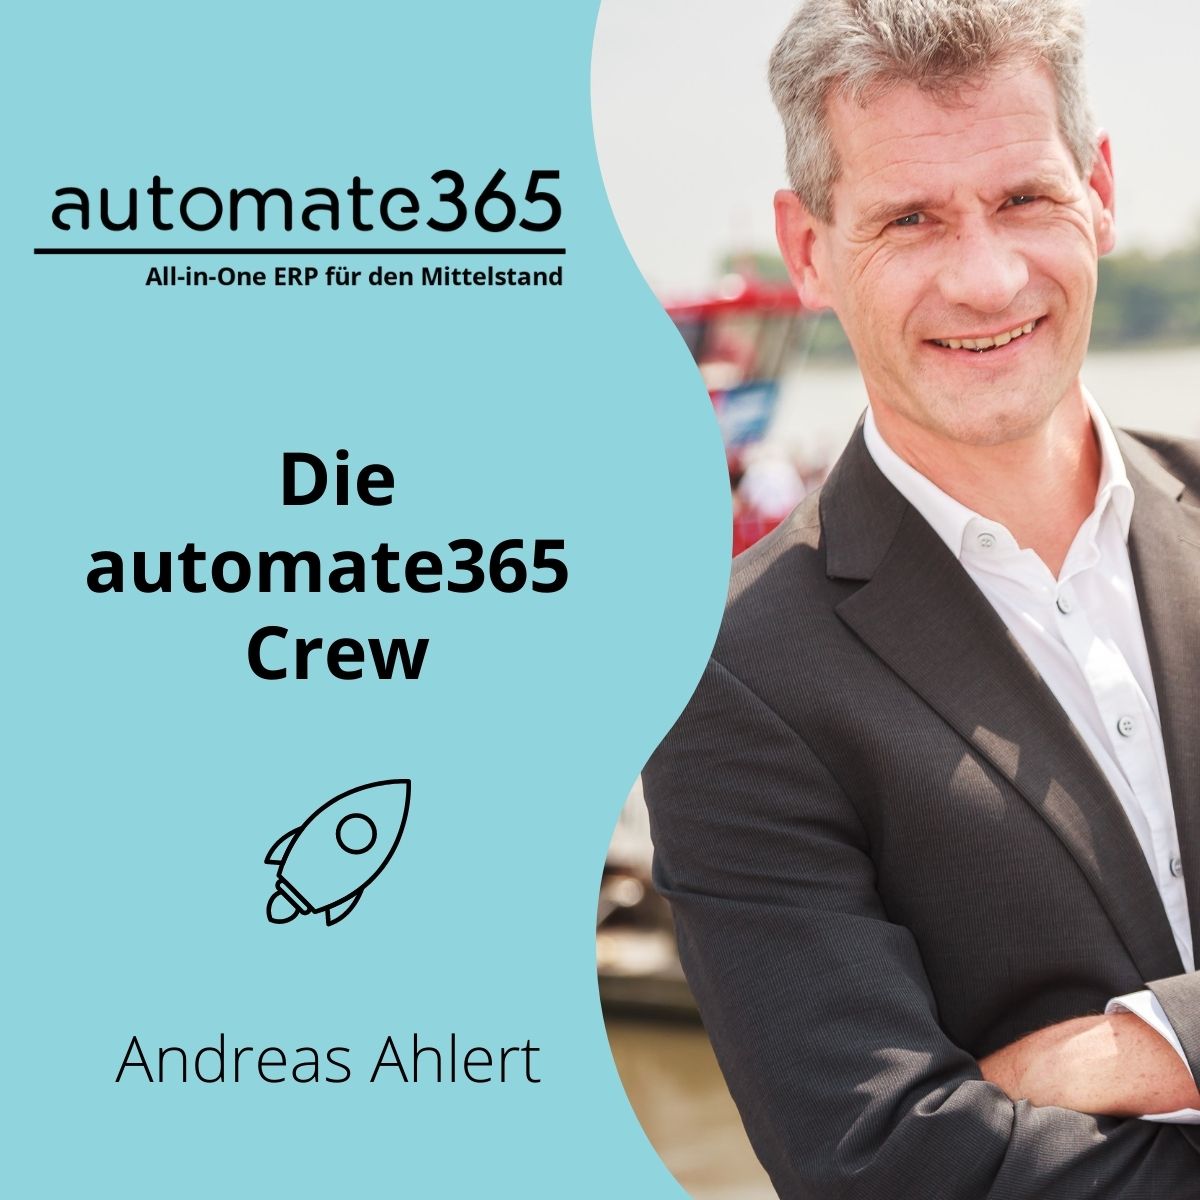 automate365-Crew: Wer steckt hinter automate365?